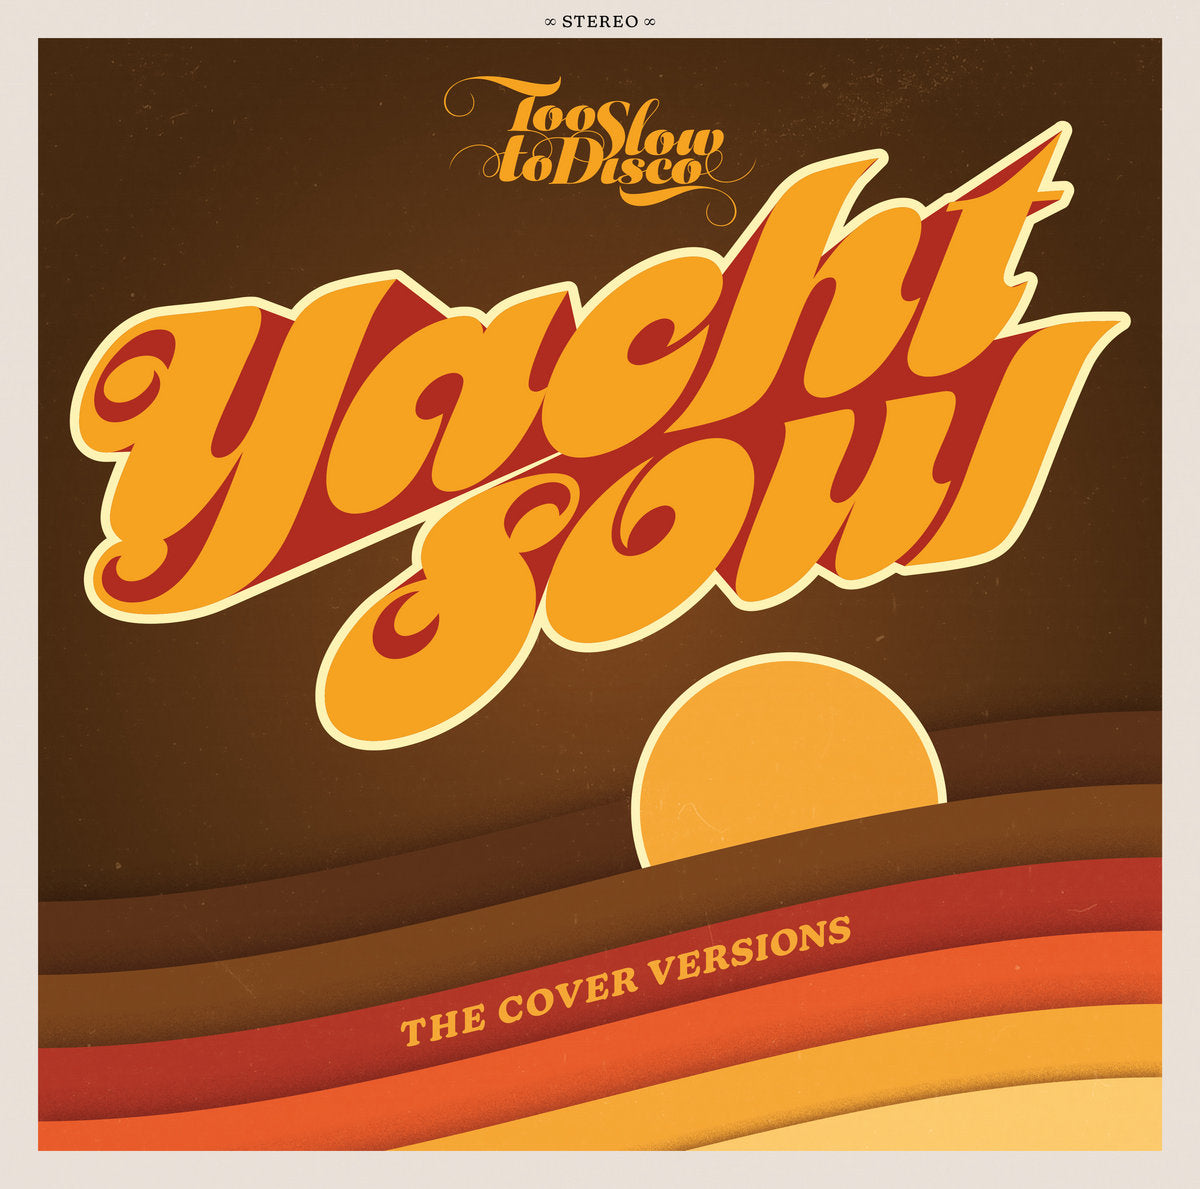 Too Slow to Disco Yacht Soul - The Cover Versions (New 2LP)